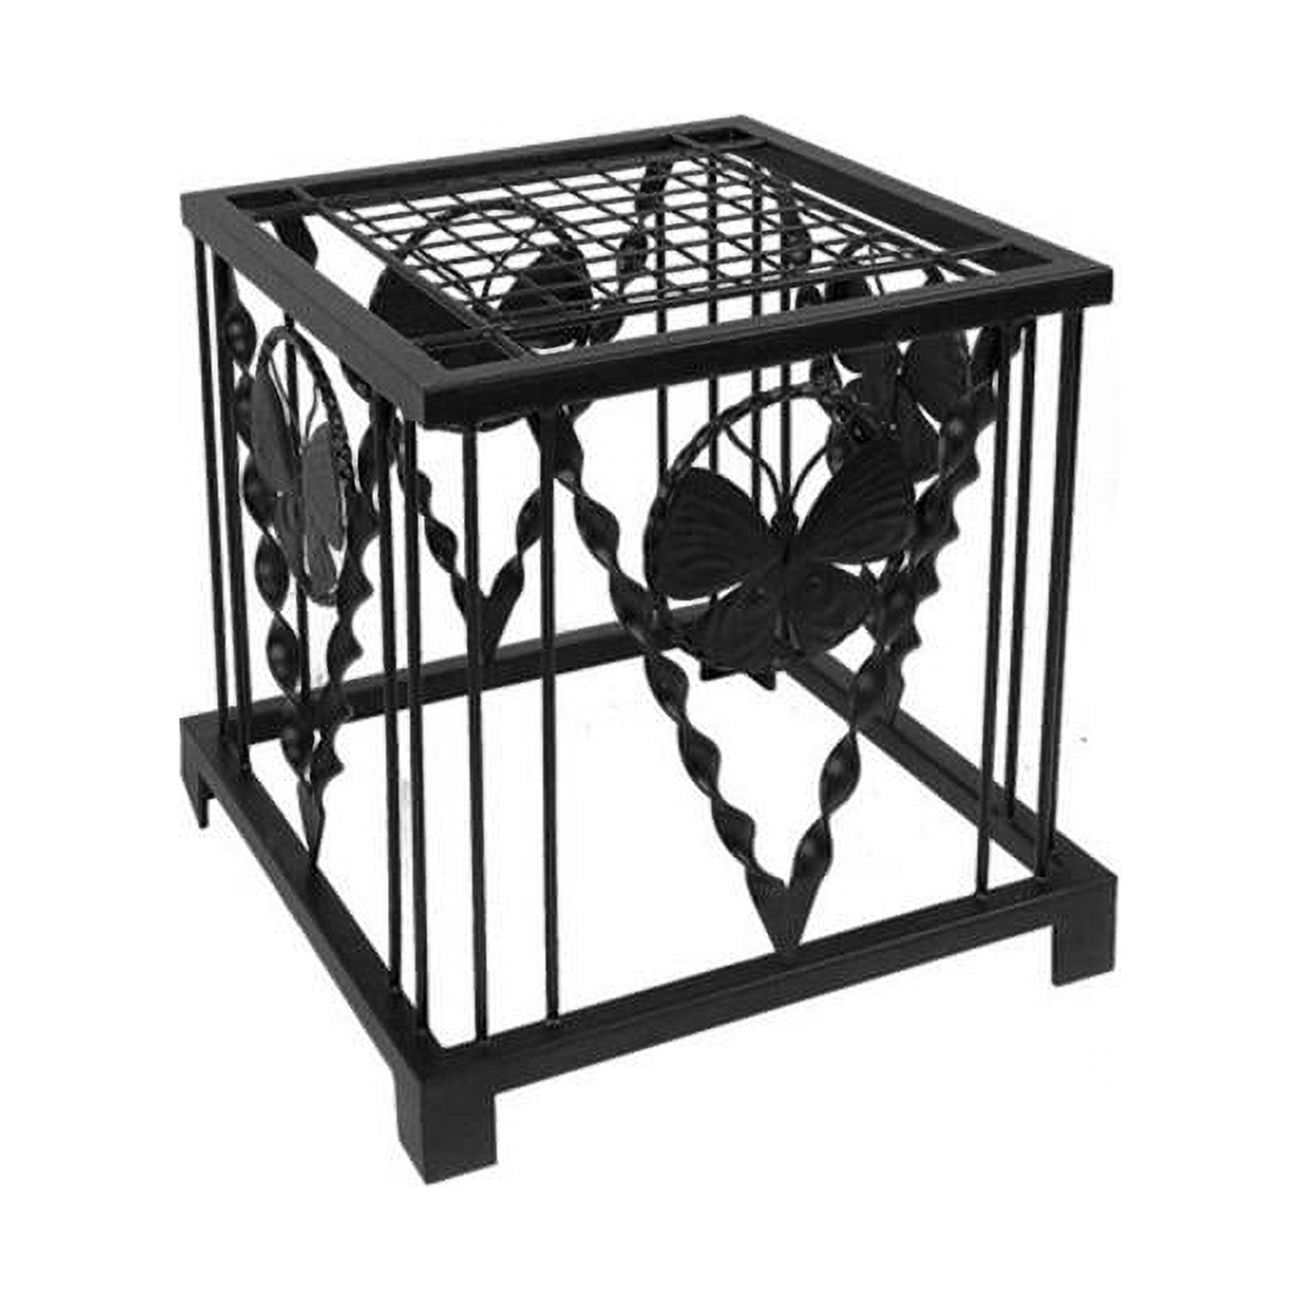 Achla FB-65 Julia Outdoor Plant Stand - image 1 of 2